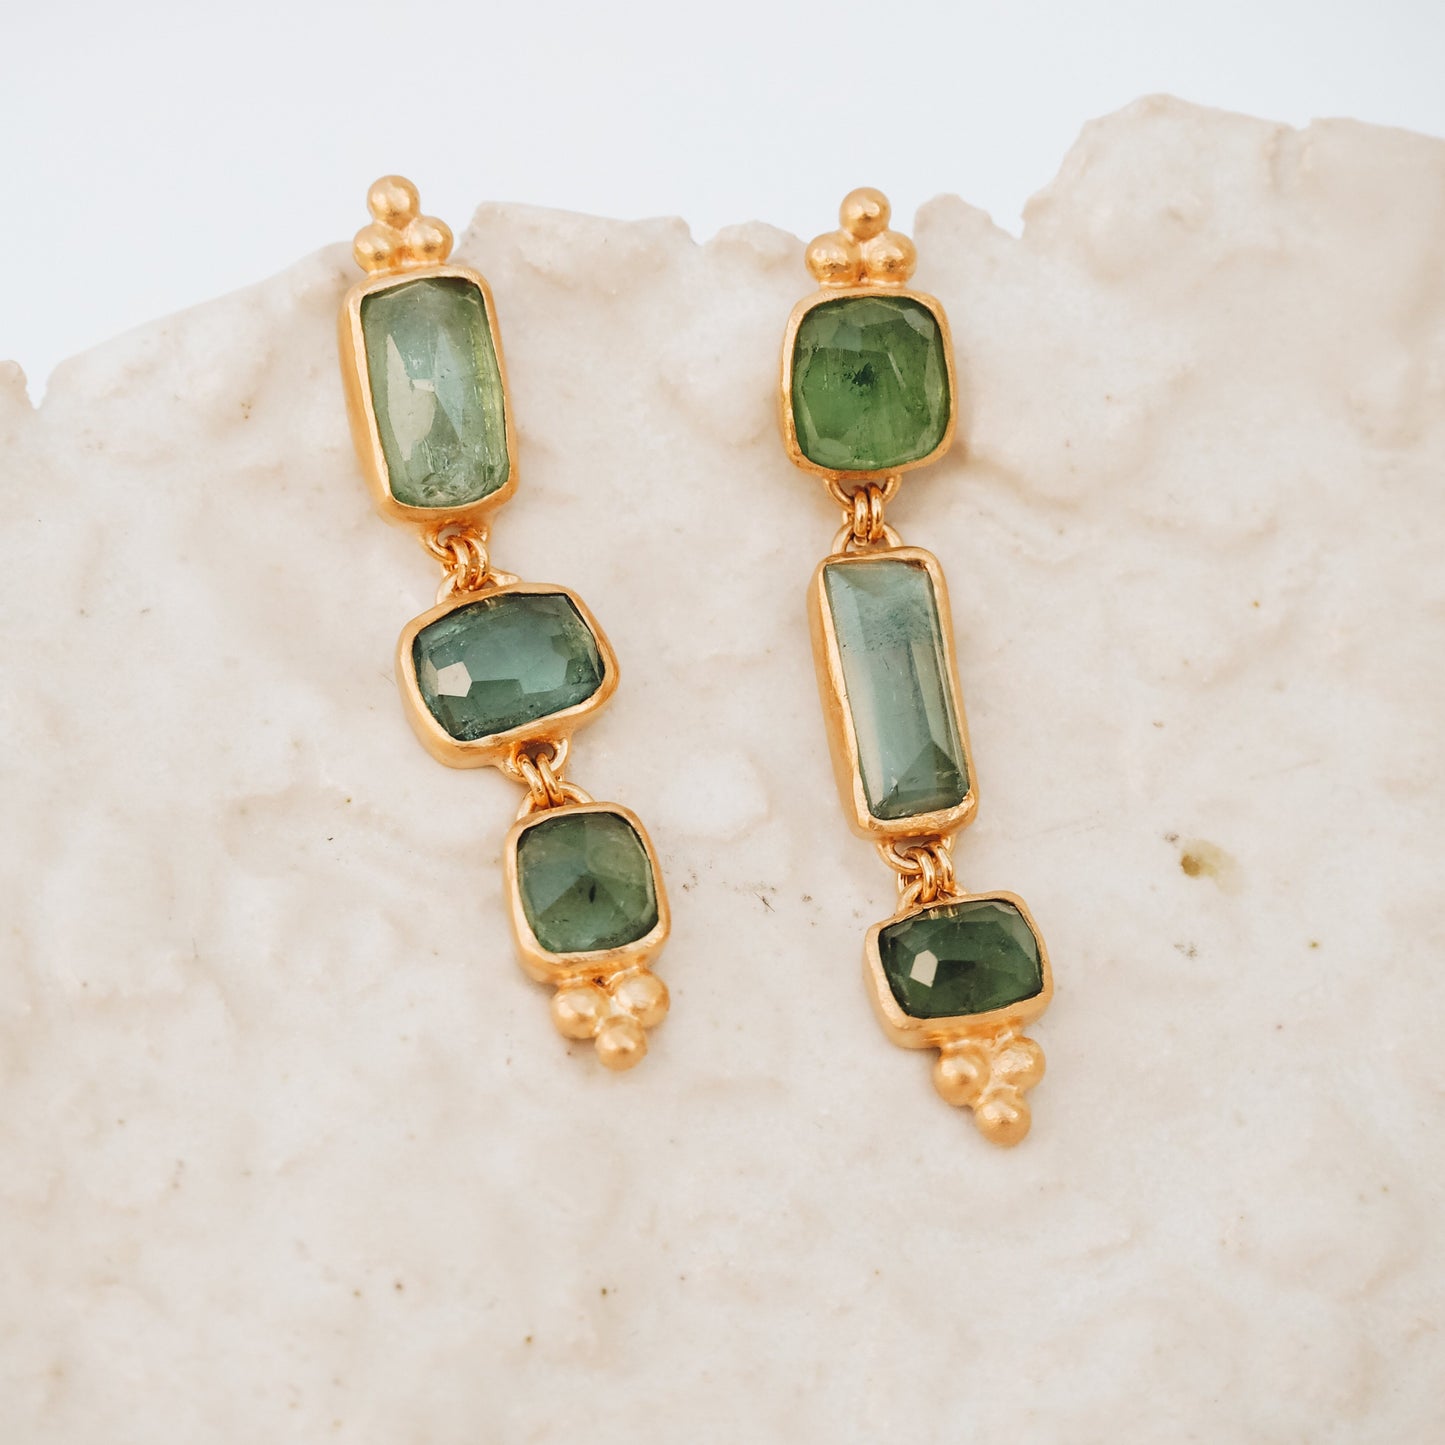 Pair of dainty gold gemstone drop earrings featuring one-of-a-kind square rose cut tourmaline in ocean blue and green, accented with granulation.